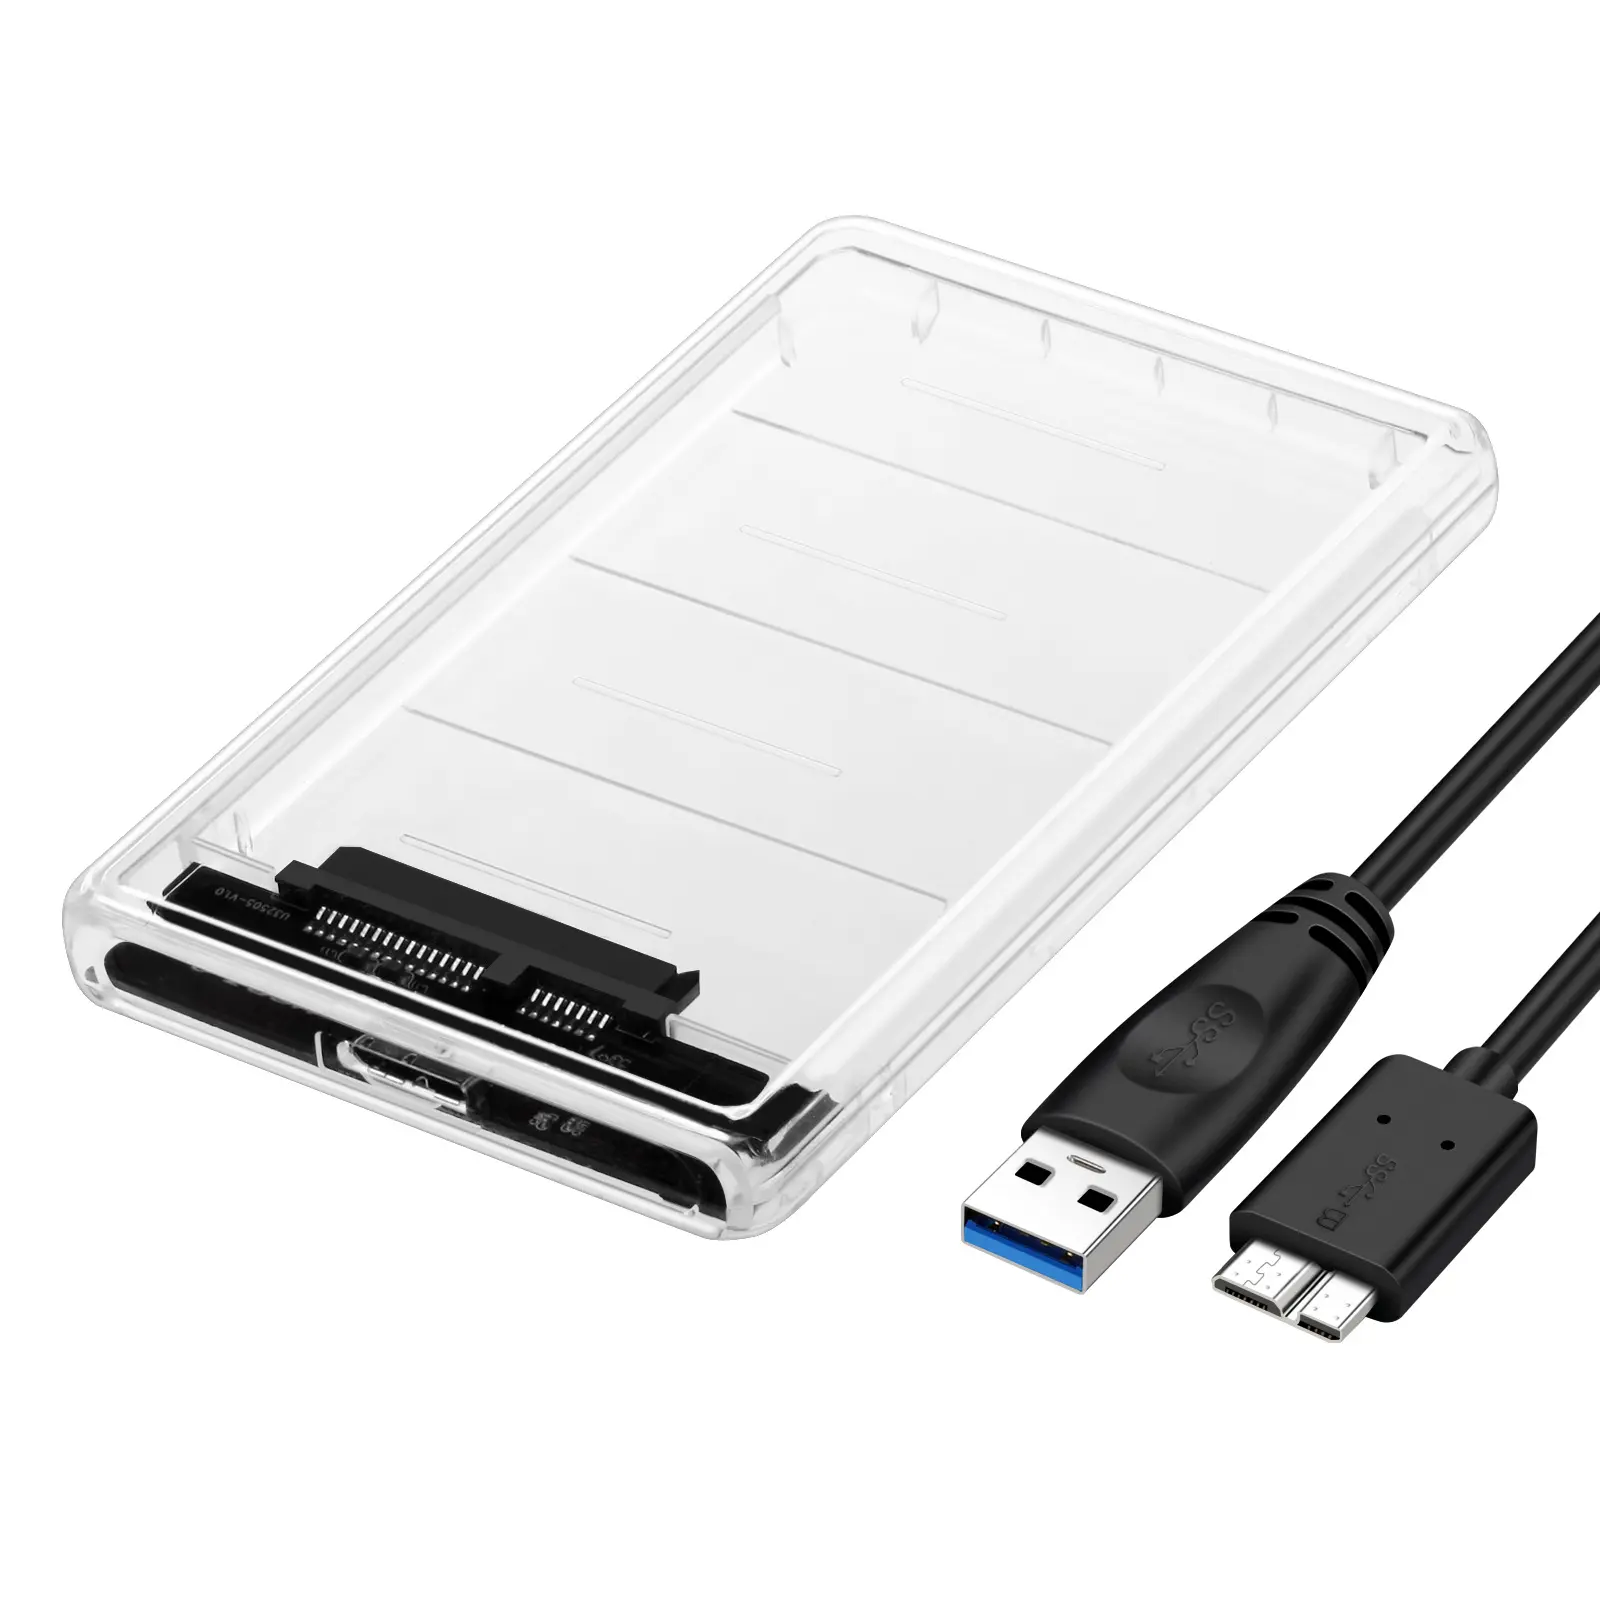 Portable 2.5" Hard Drive Enclosure USB 3.0 to SATA III for 2.5 Inch SSD   HDD 9.5mm 7mm External Hard Drive Case Support Max 6TB